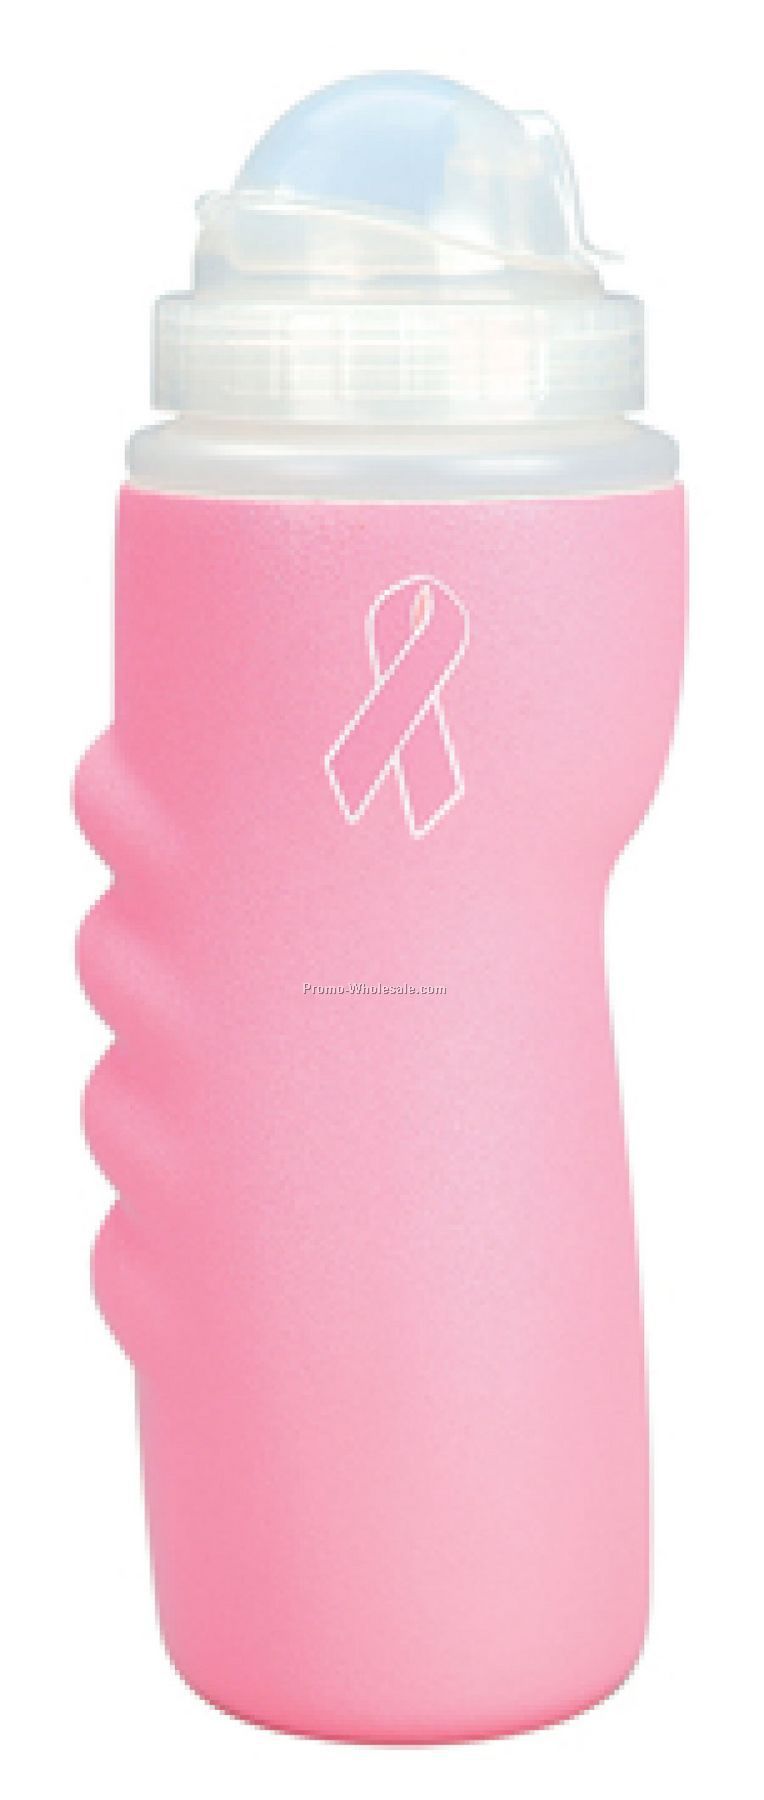 Igloo 1 Liter Chilly Wrap Picnic Breast Cancer Awareness Cooler